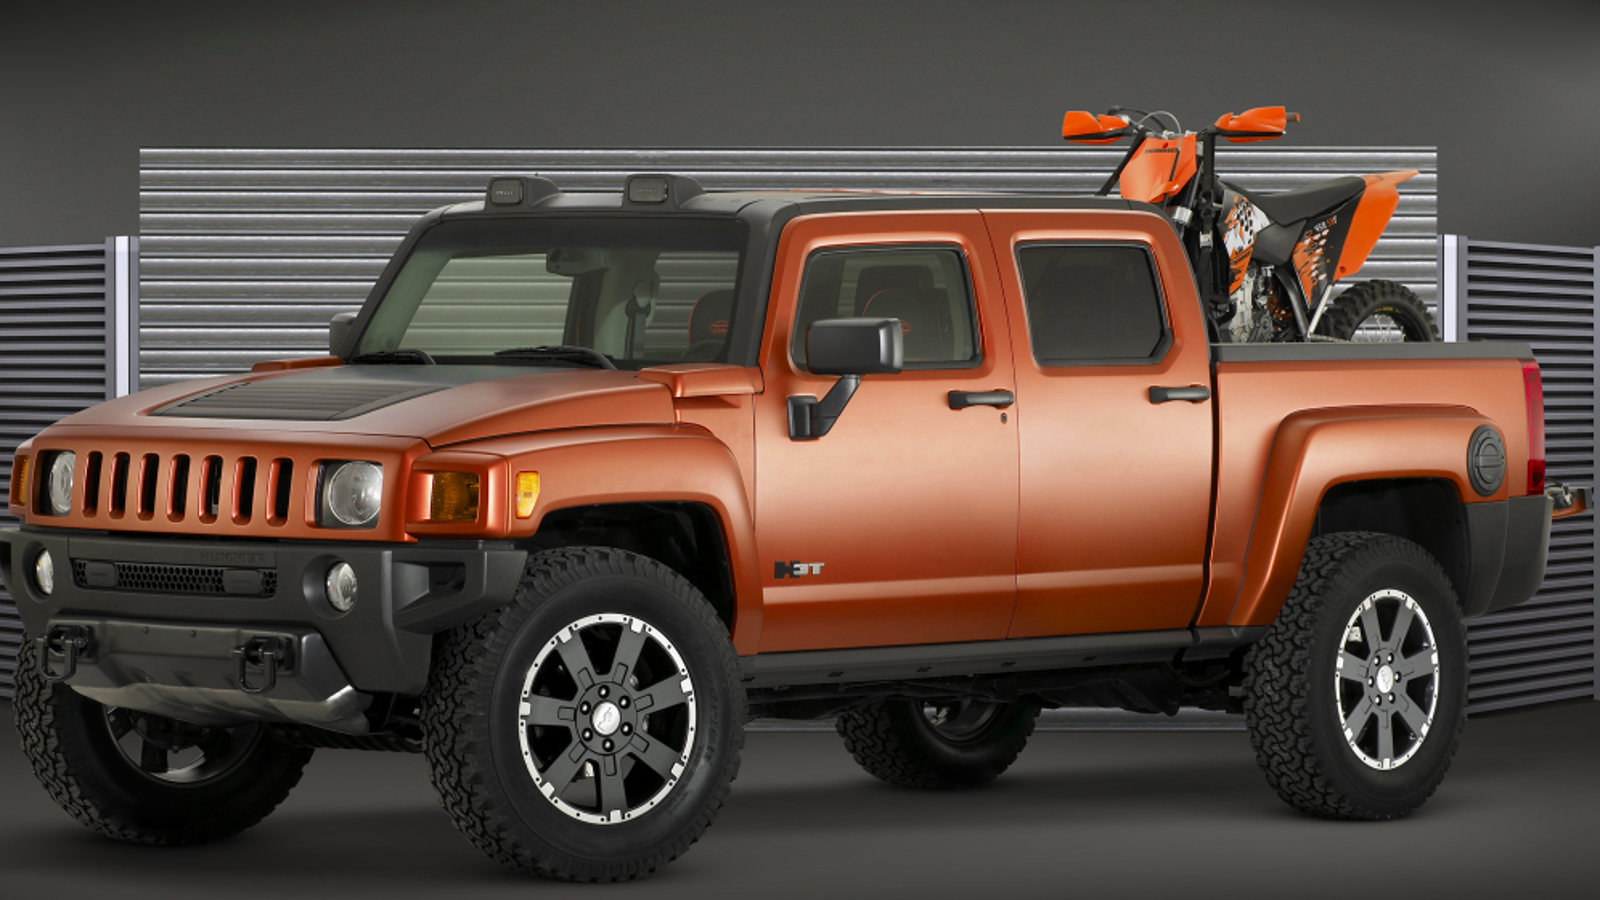 Hummer Is Coming Back As An Electric Off-Road Pickup By GMC: Wall Street Journal